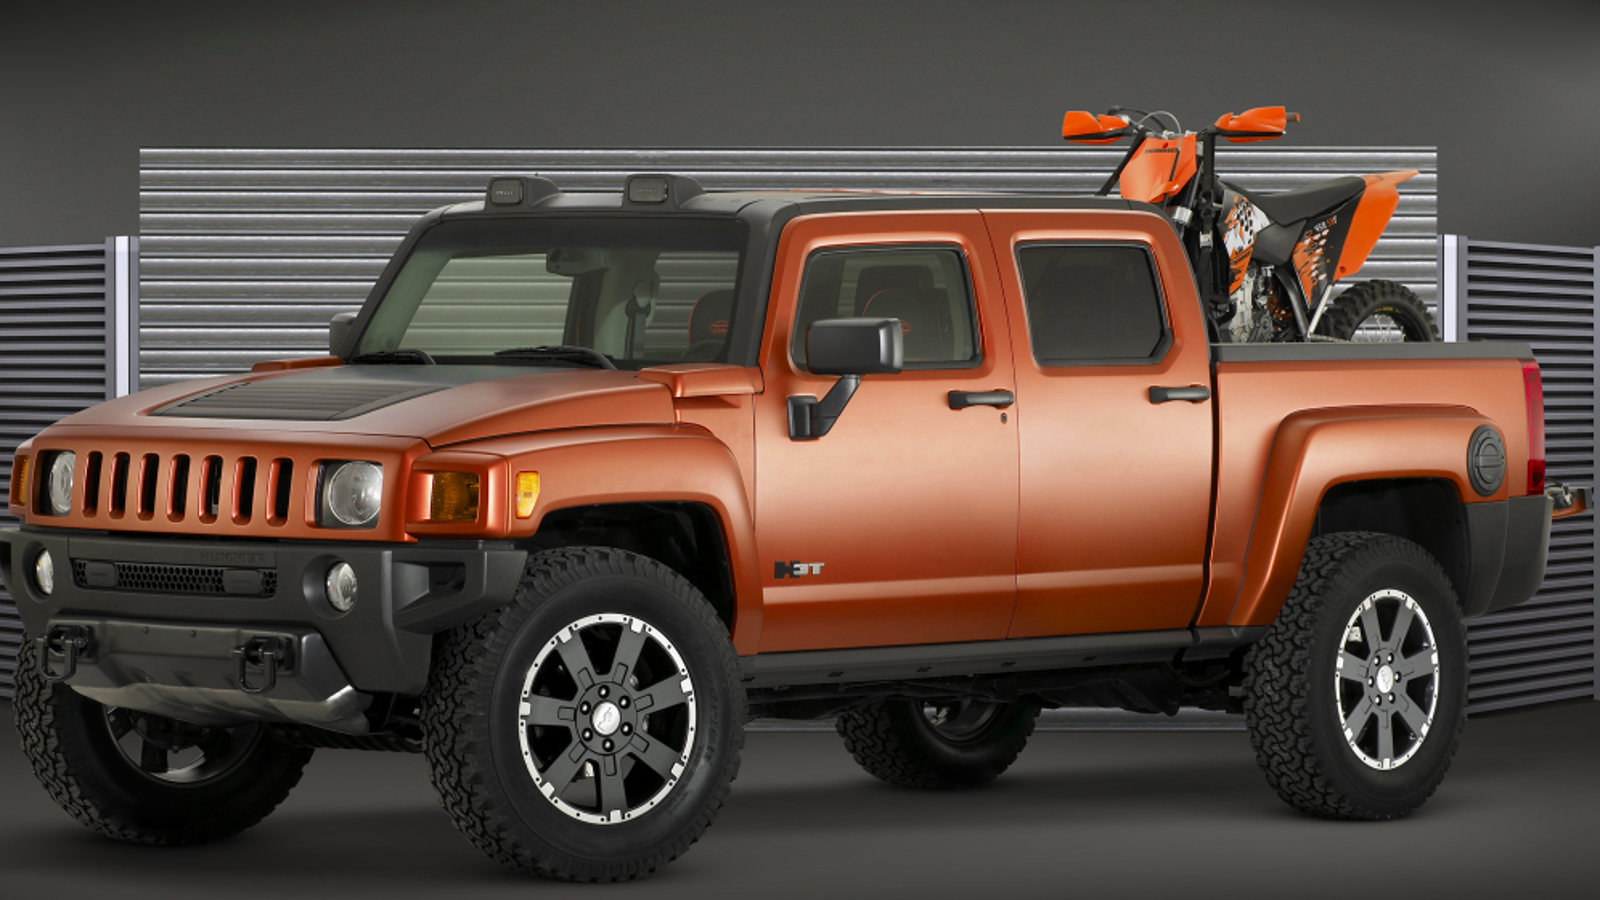 Hummer Is Coming Back As An Electric Off-Road Pickup By GMC: Wall Street Journal